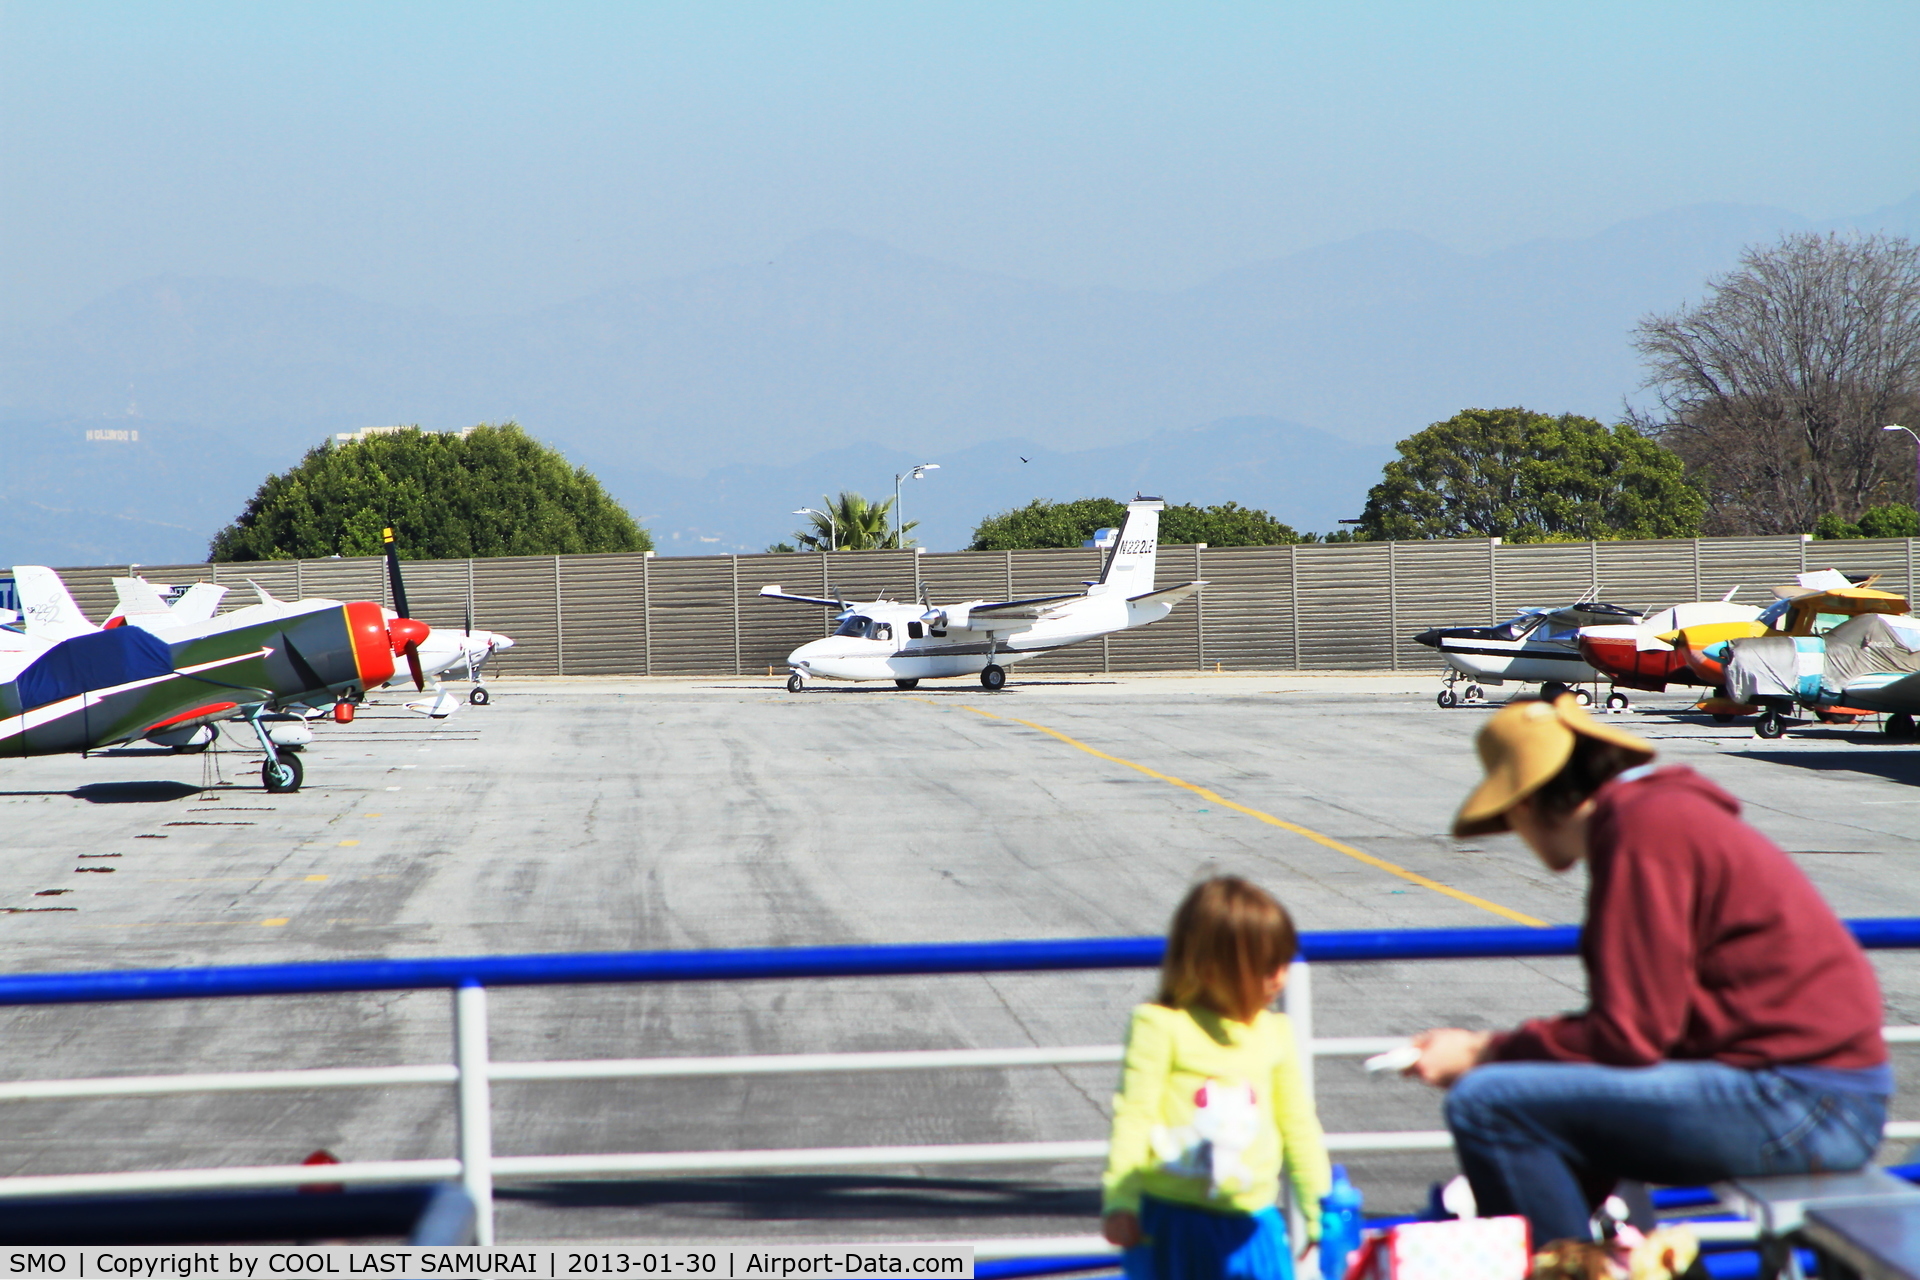 Santa Monica Municipal Airport (SMO) - A view of South-East run up area from the public view decks.